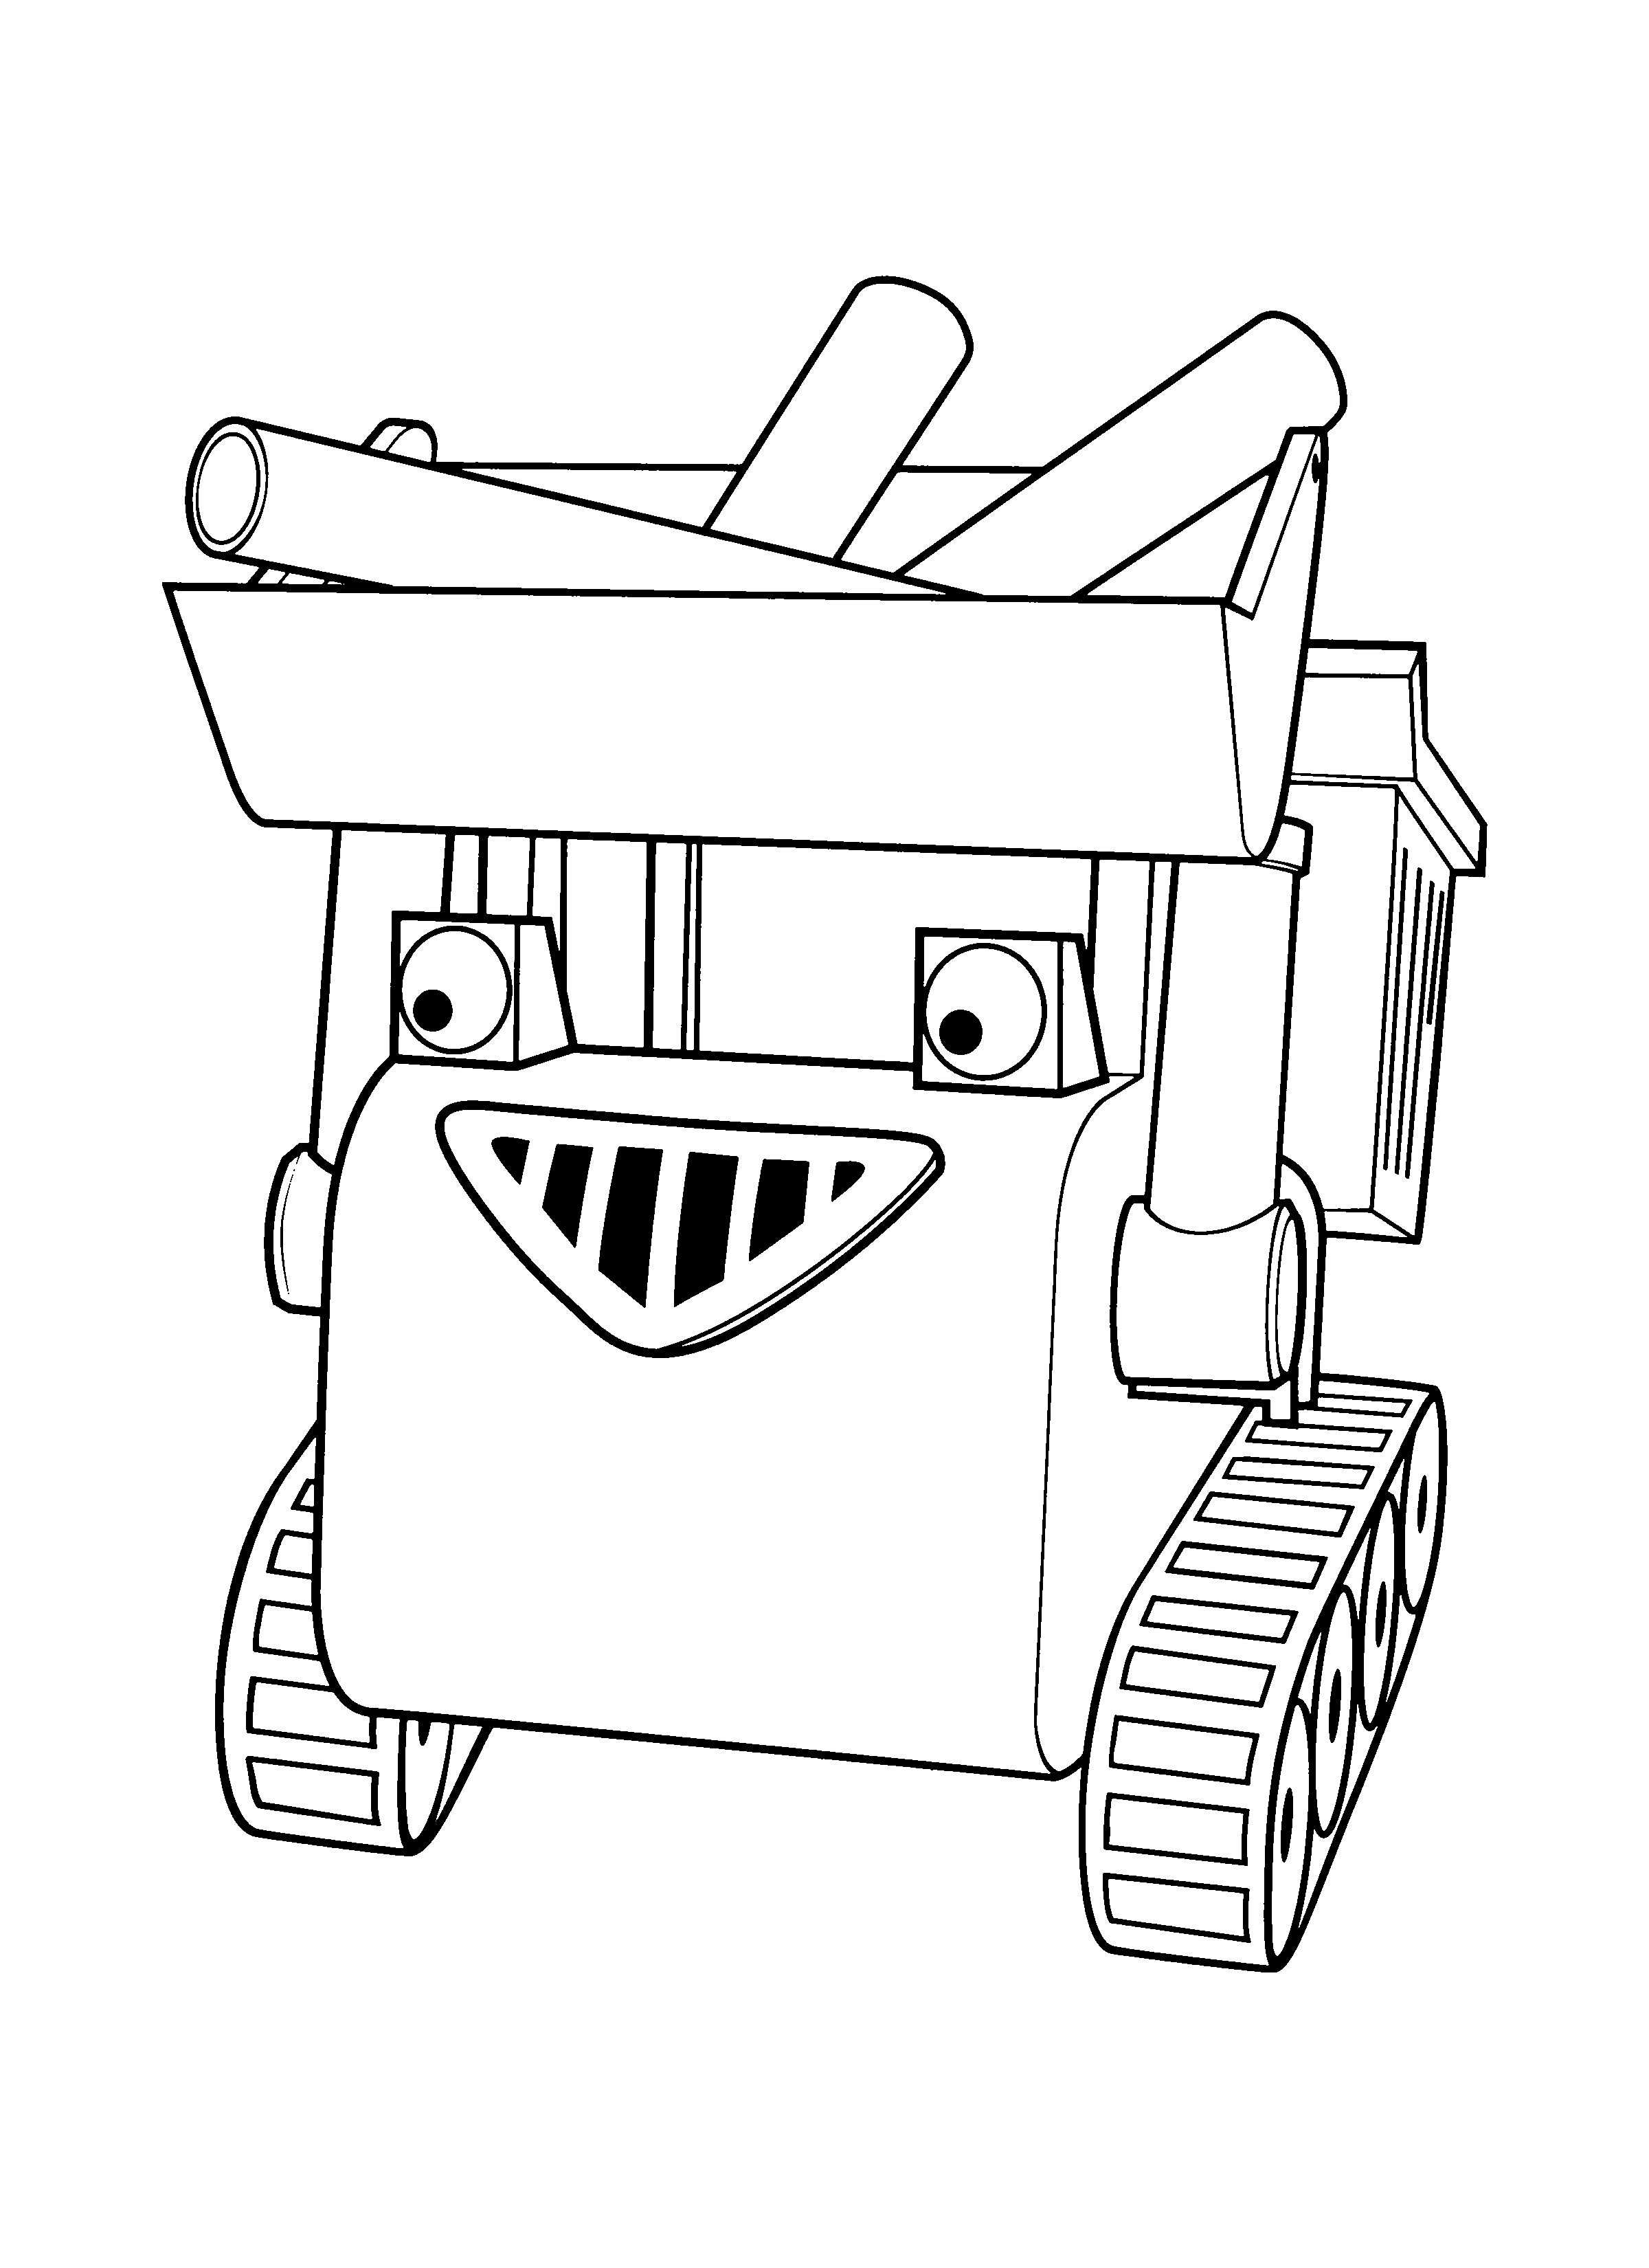 Bob the builder Coloring Pages